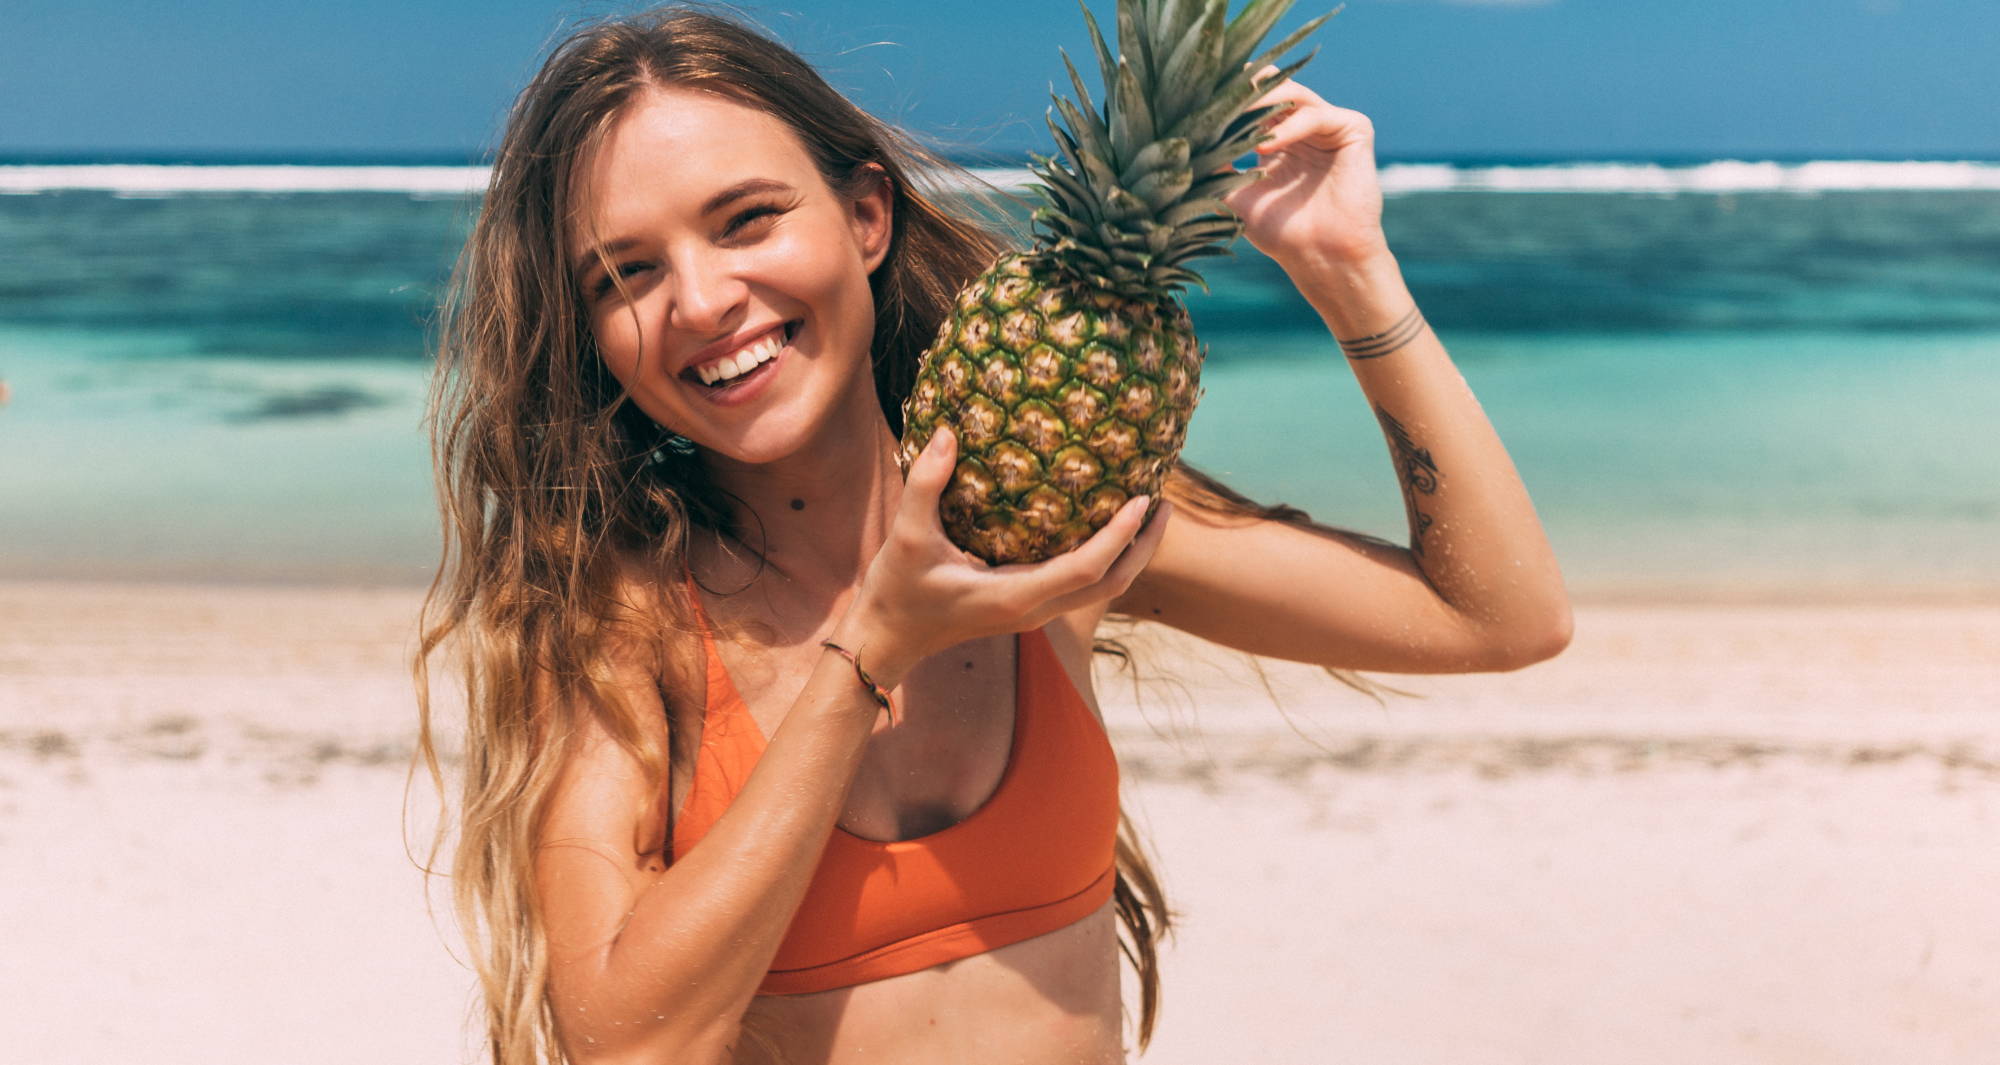 A smiling woman with long blond hair wearing an orange bra stands on a beach holding a pineapple up near her face. 